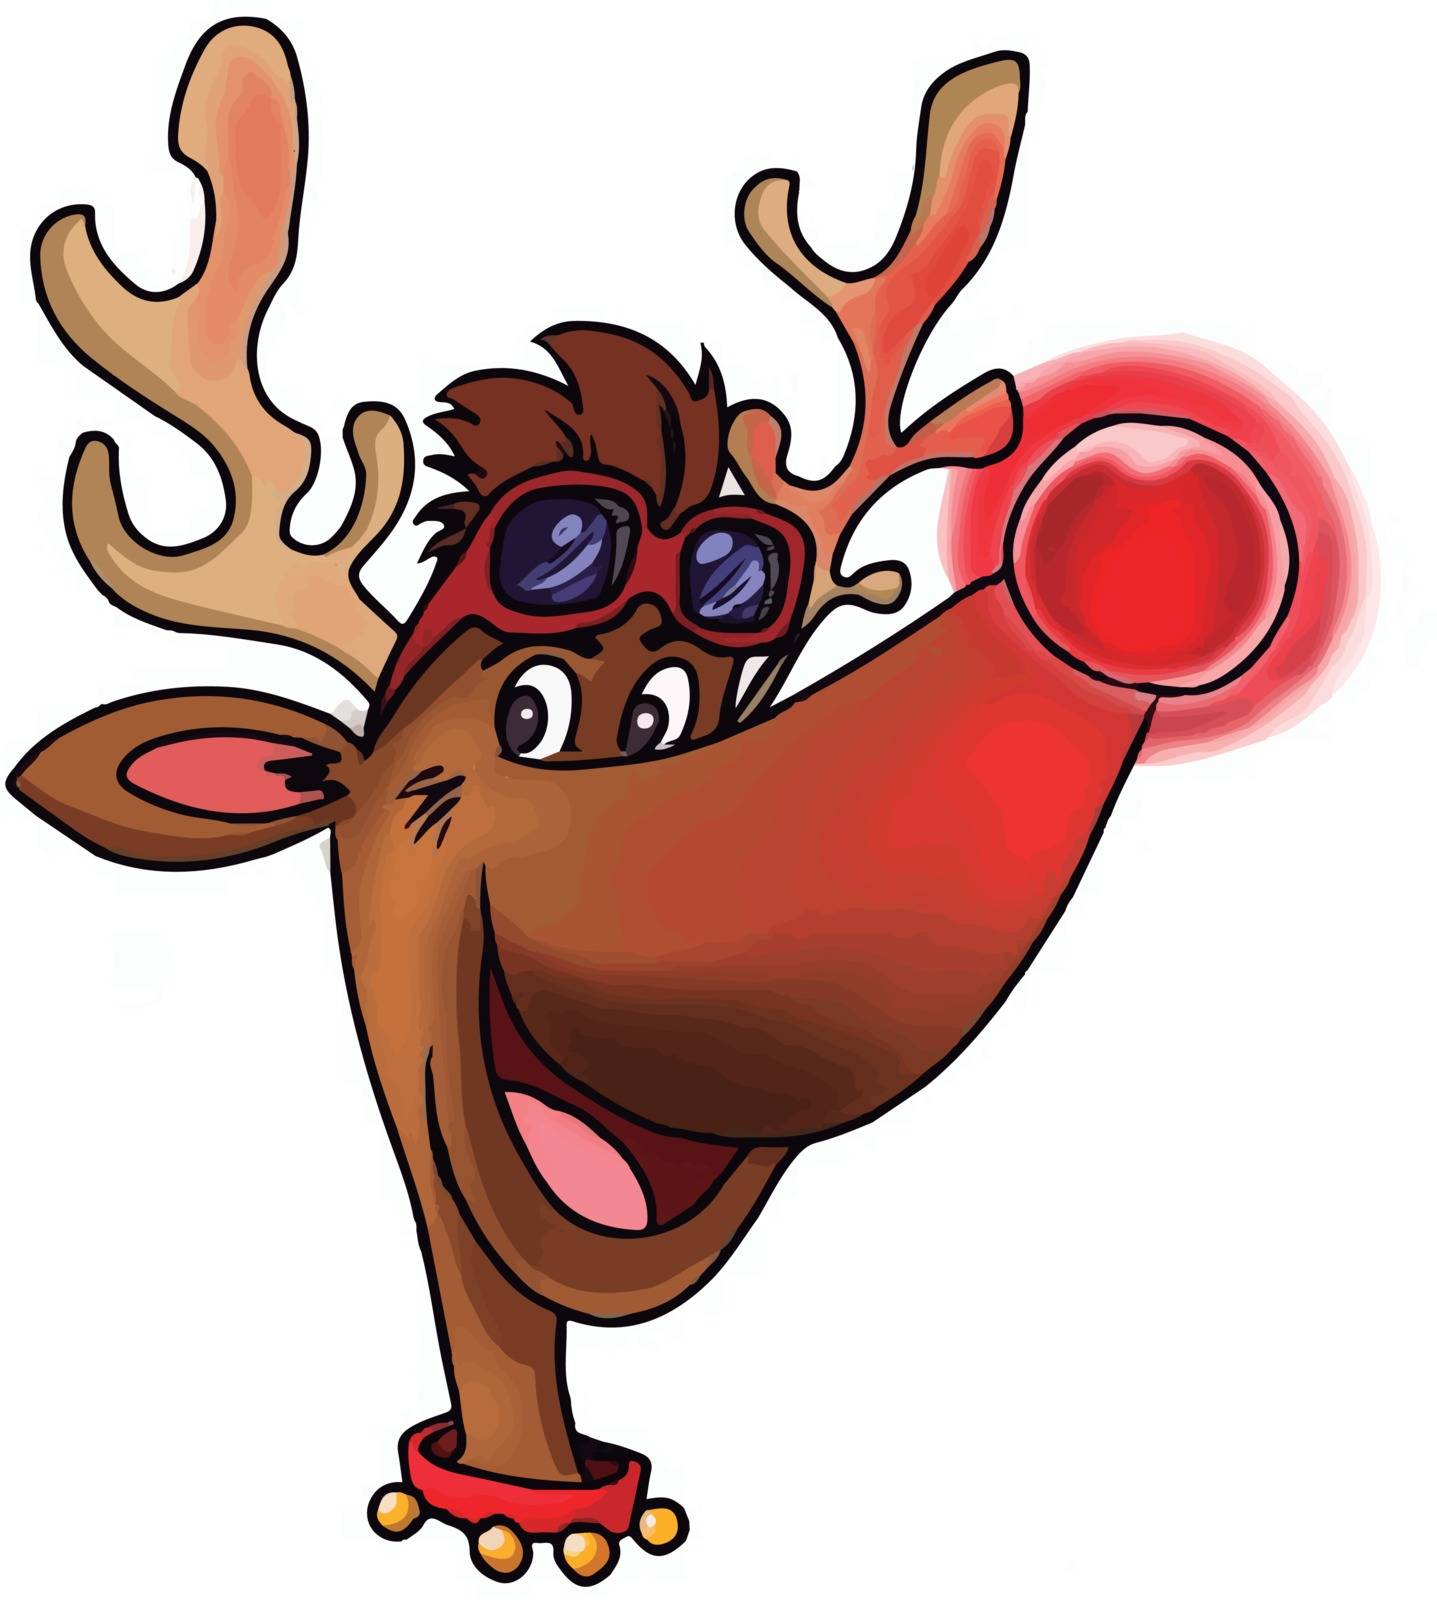 A reindeer with big red nose, illustration, vector on white background.